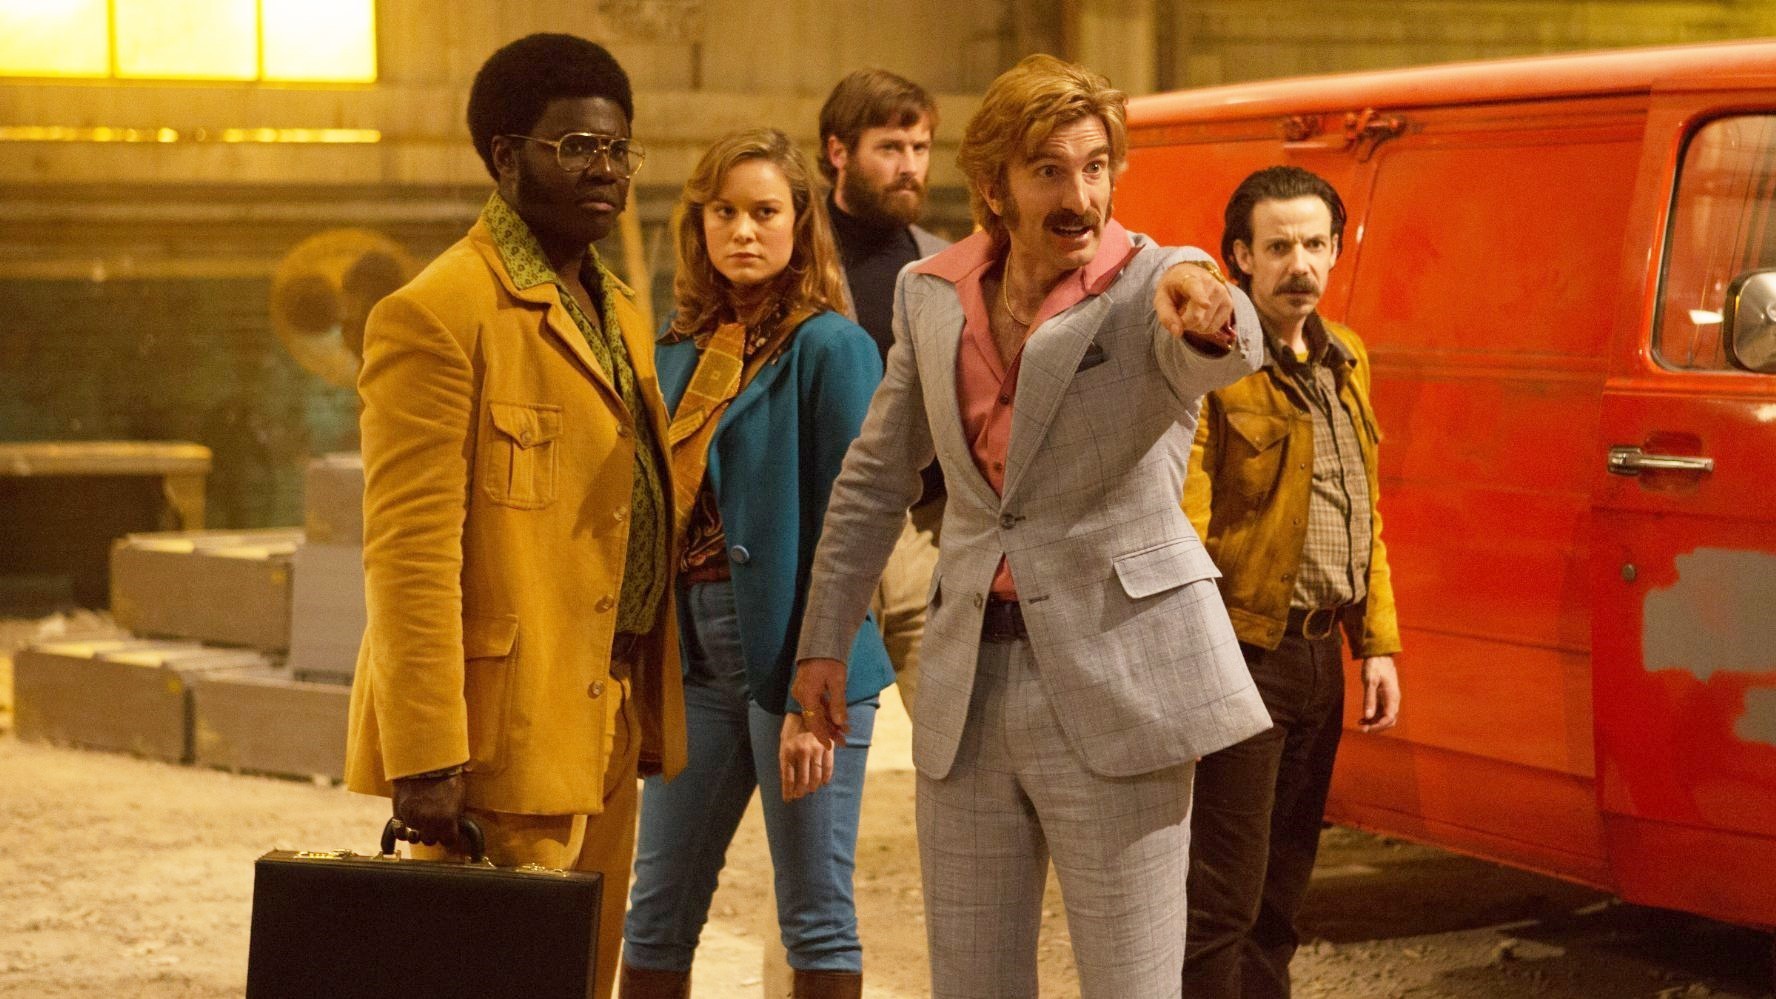 Babou Ceesay, Brie Larson, Armie Hammer, Sharlto Copley and Noah Taylor in A24's Free Fire (2017)